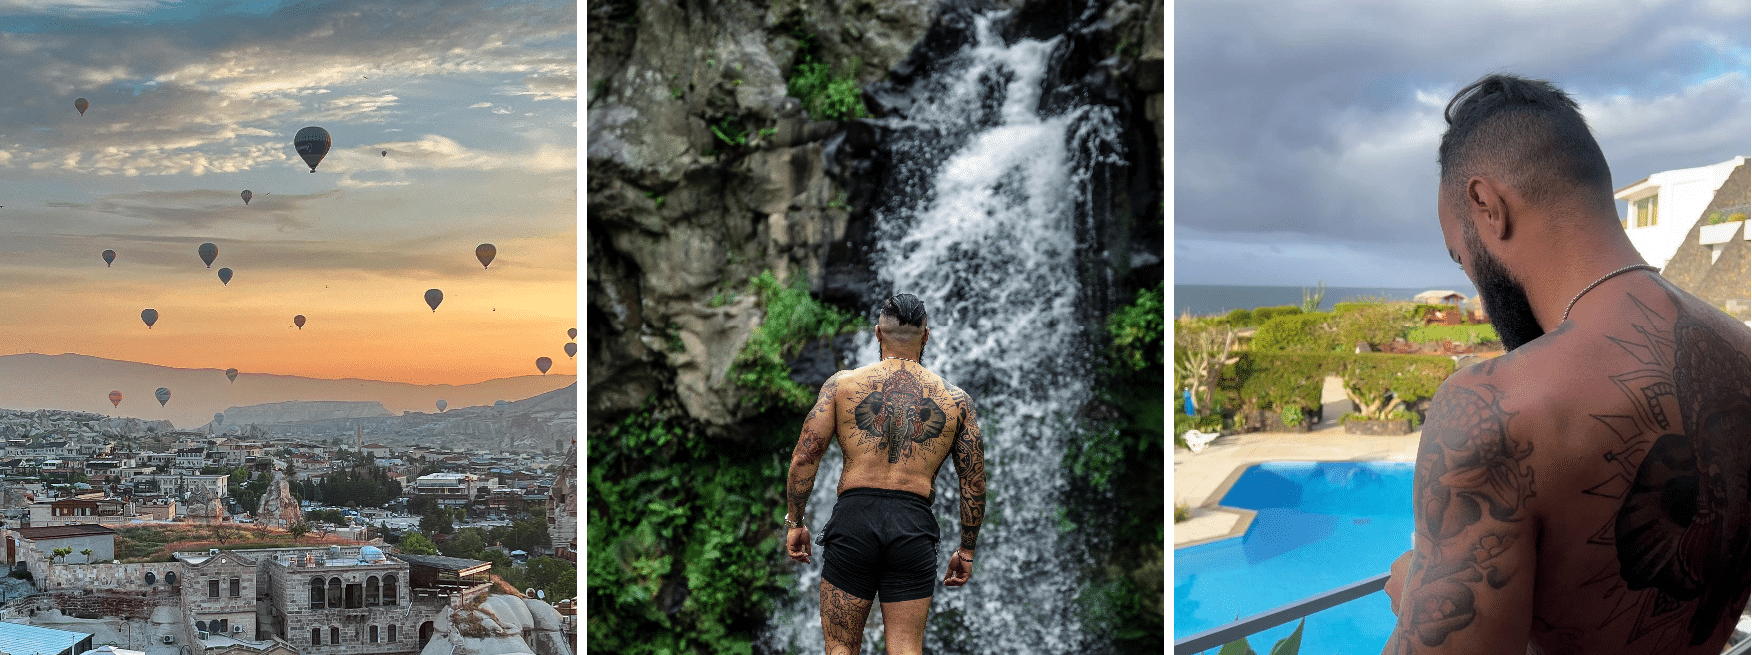 A man with tattoos is standing in front of a waterfall and hot air balloons.